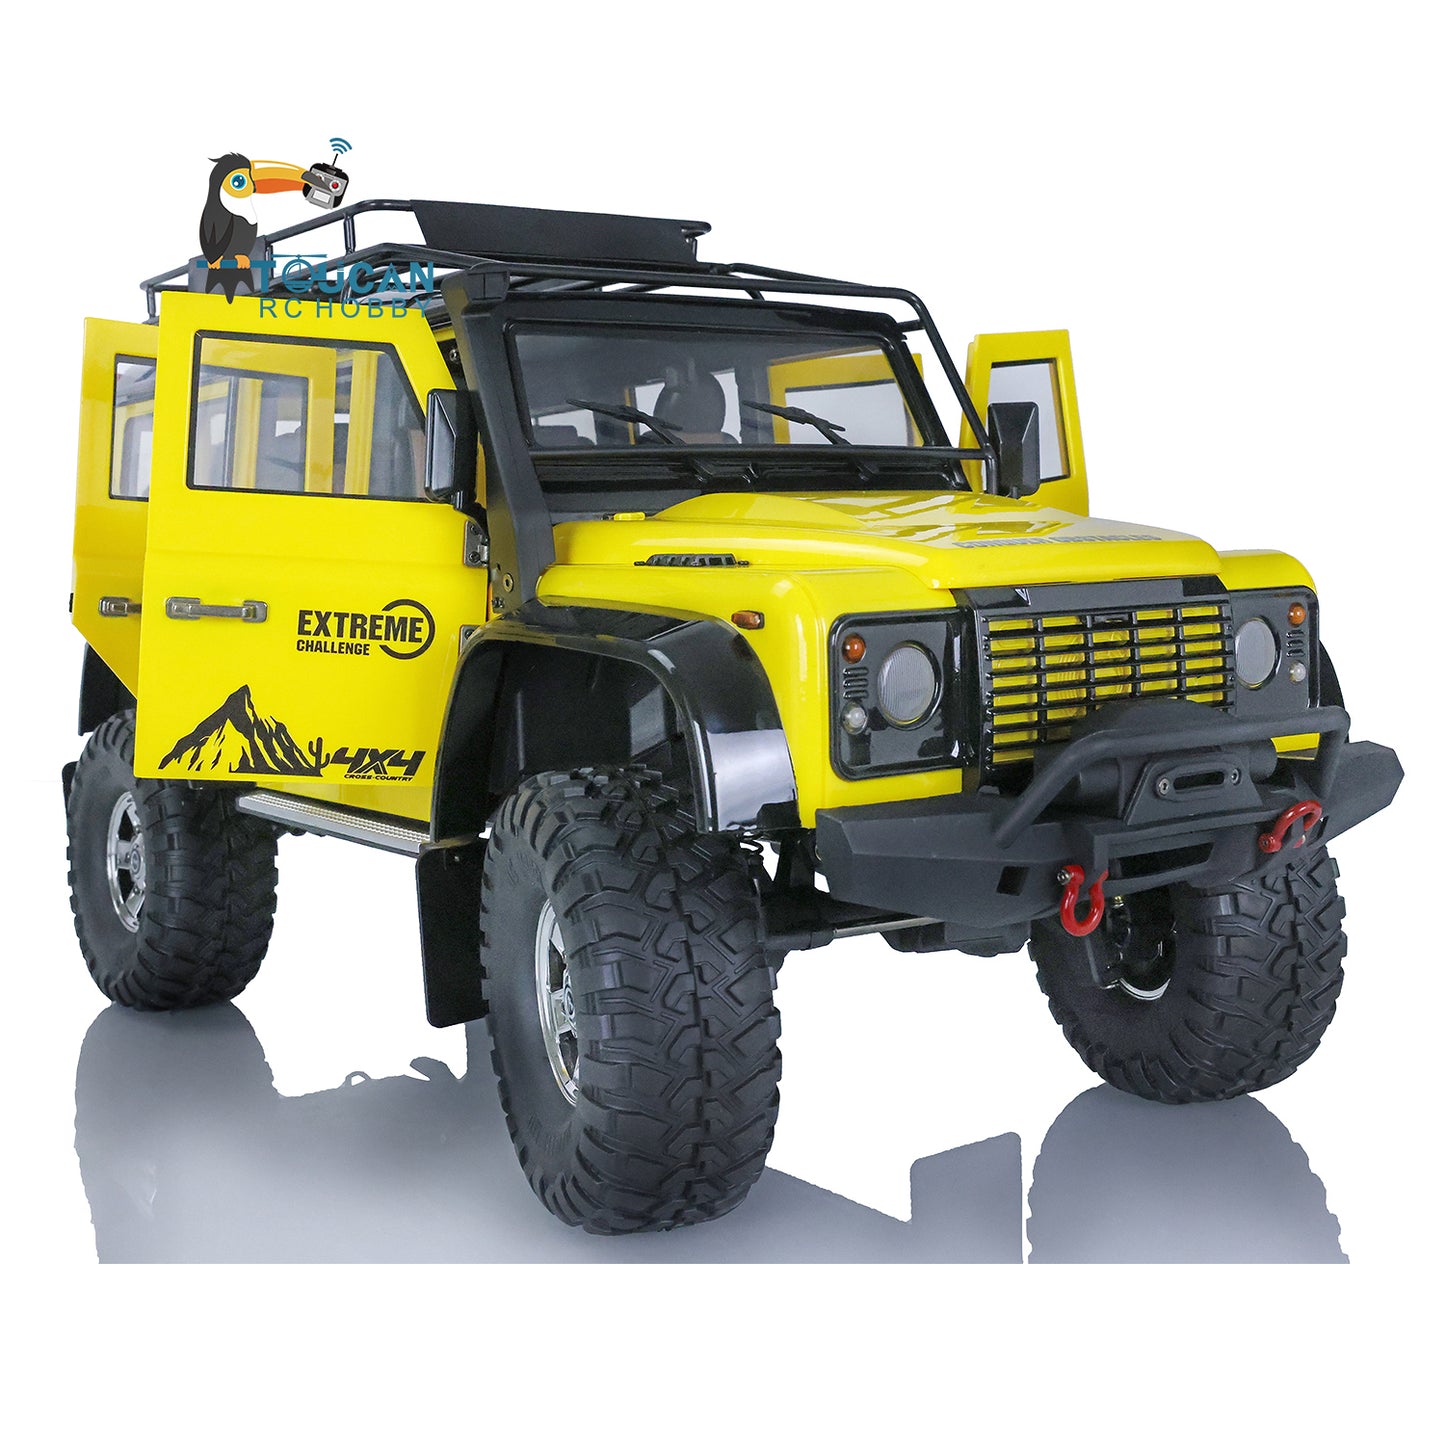 In Stock HG Remote Control Rock Clawer 1/10 4x4 Off-road Climbing Vehicle P411 RC Truck Car Differential Lock 45A ESC Outdoor Truck